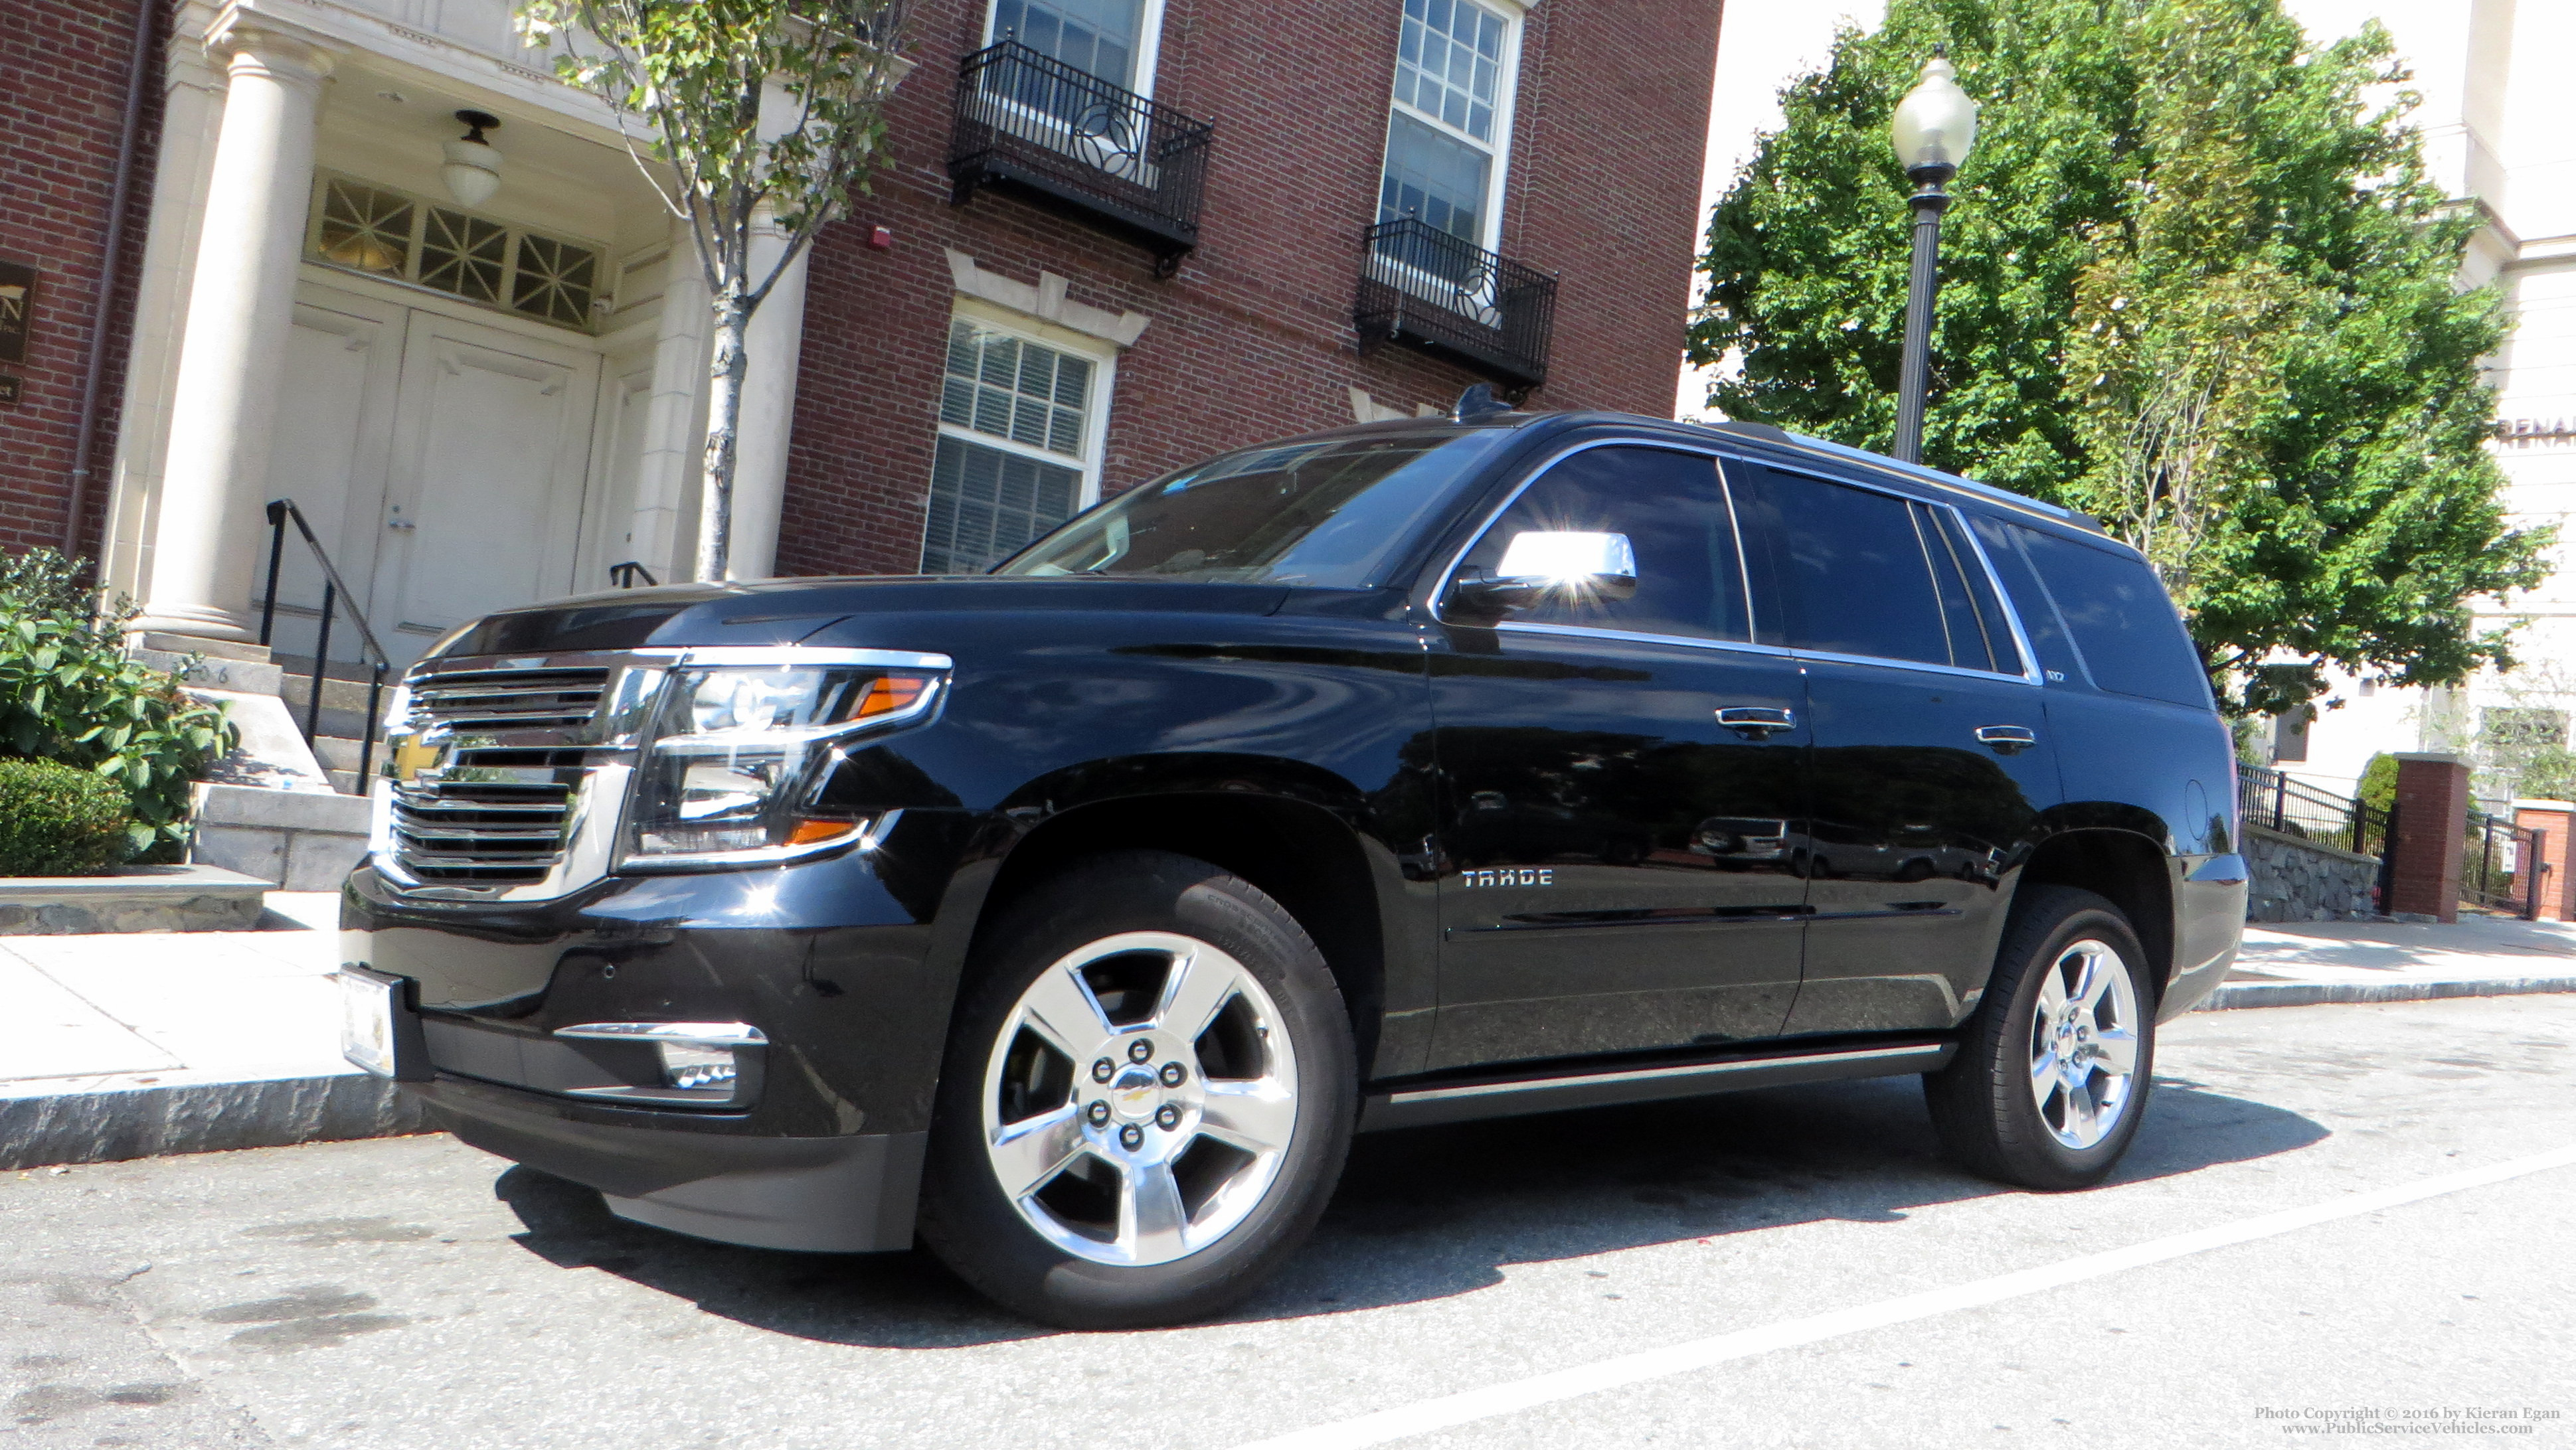 A photo  of All Providence Administrative & Service Vehicles
            Car 1, a 2015-2016 Chevrolet Tahoe             taken by Kieran Egan